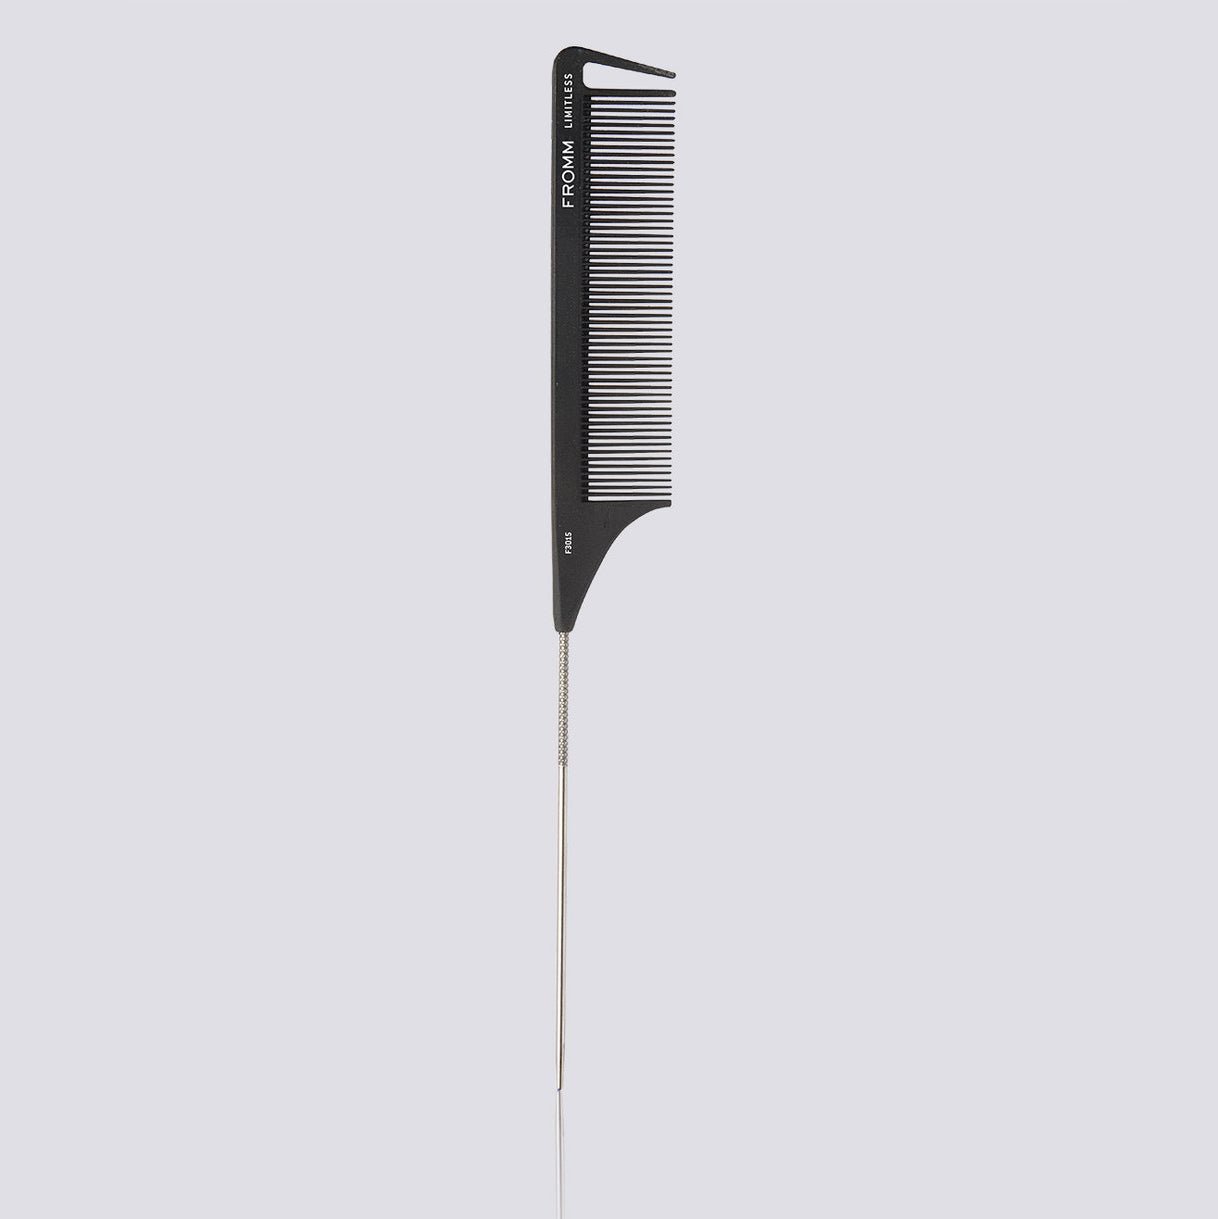 LIMITLESS 9" CARBON PIN TAIL COMB | F3015 | FROMM - SH Salons